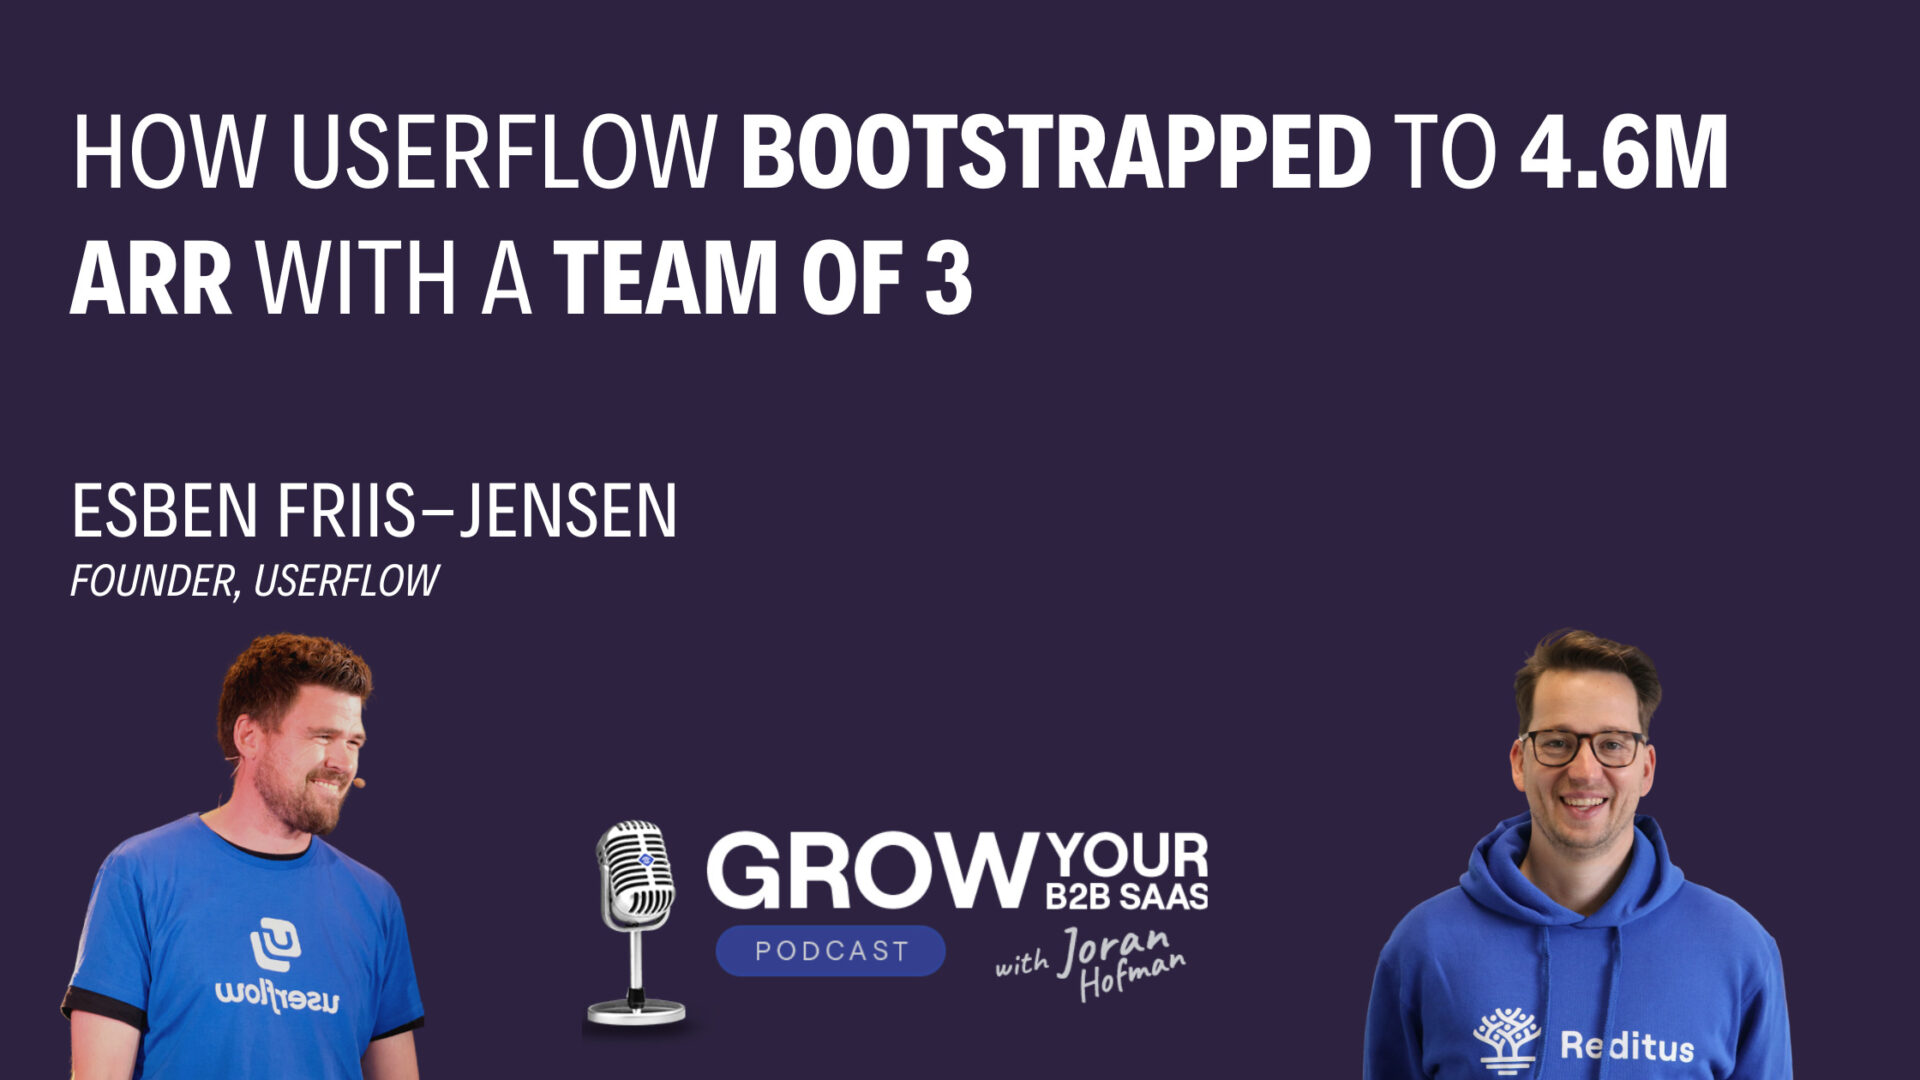 https://www.getreditus.com/podcast/how-userflow-bootstrapped-to-4m-arr-with-a-team-of-3/